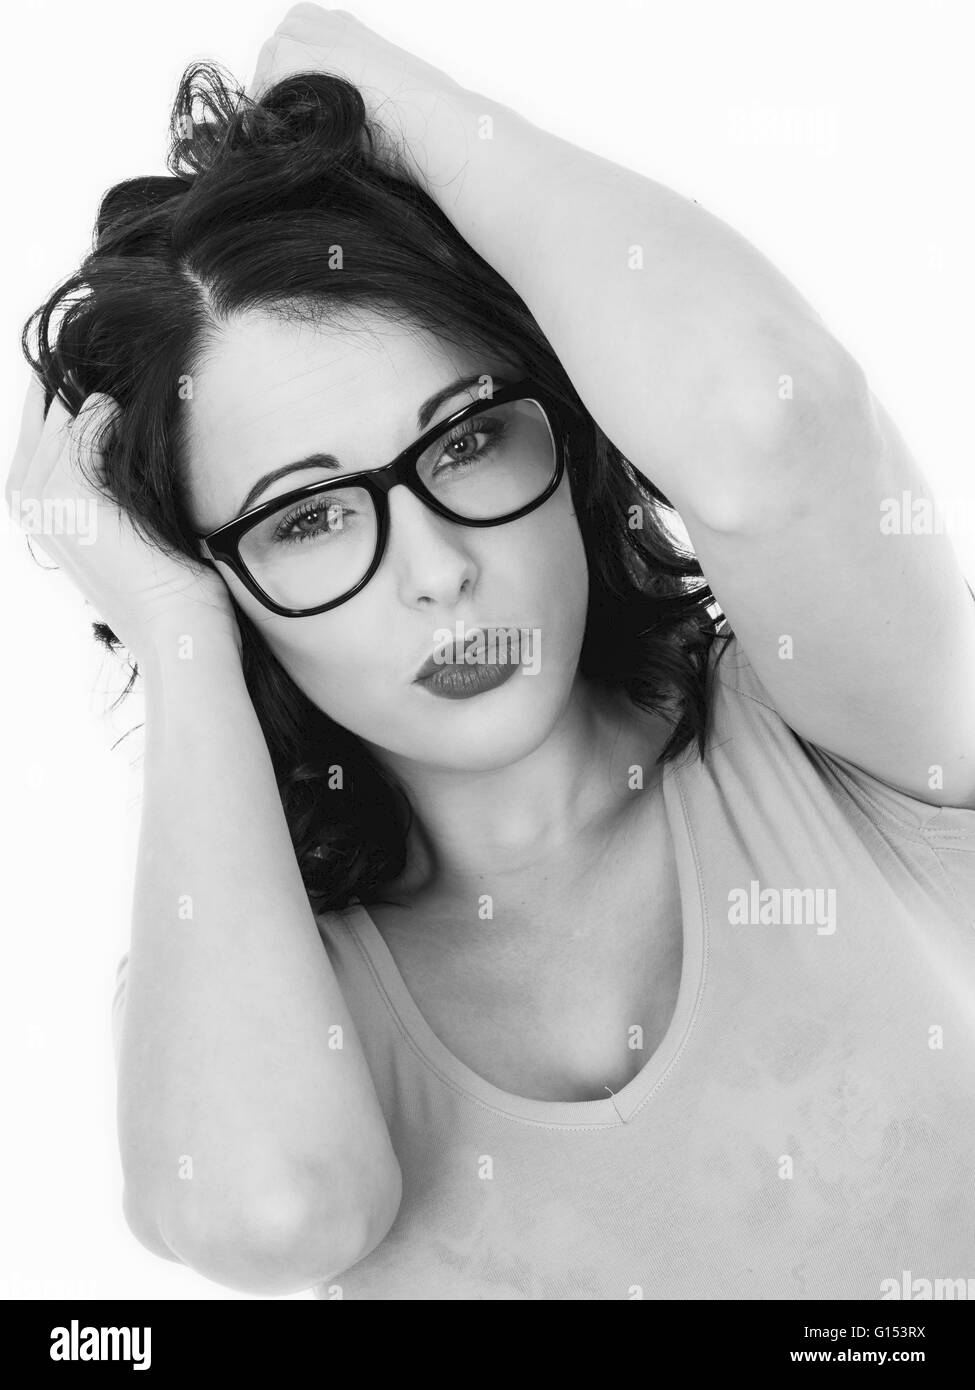 Black and White Portrait Of a Frustrated Angry Business Woman Pulling Her Hair Out Stock Photo